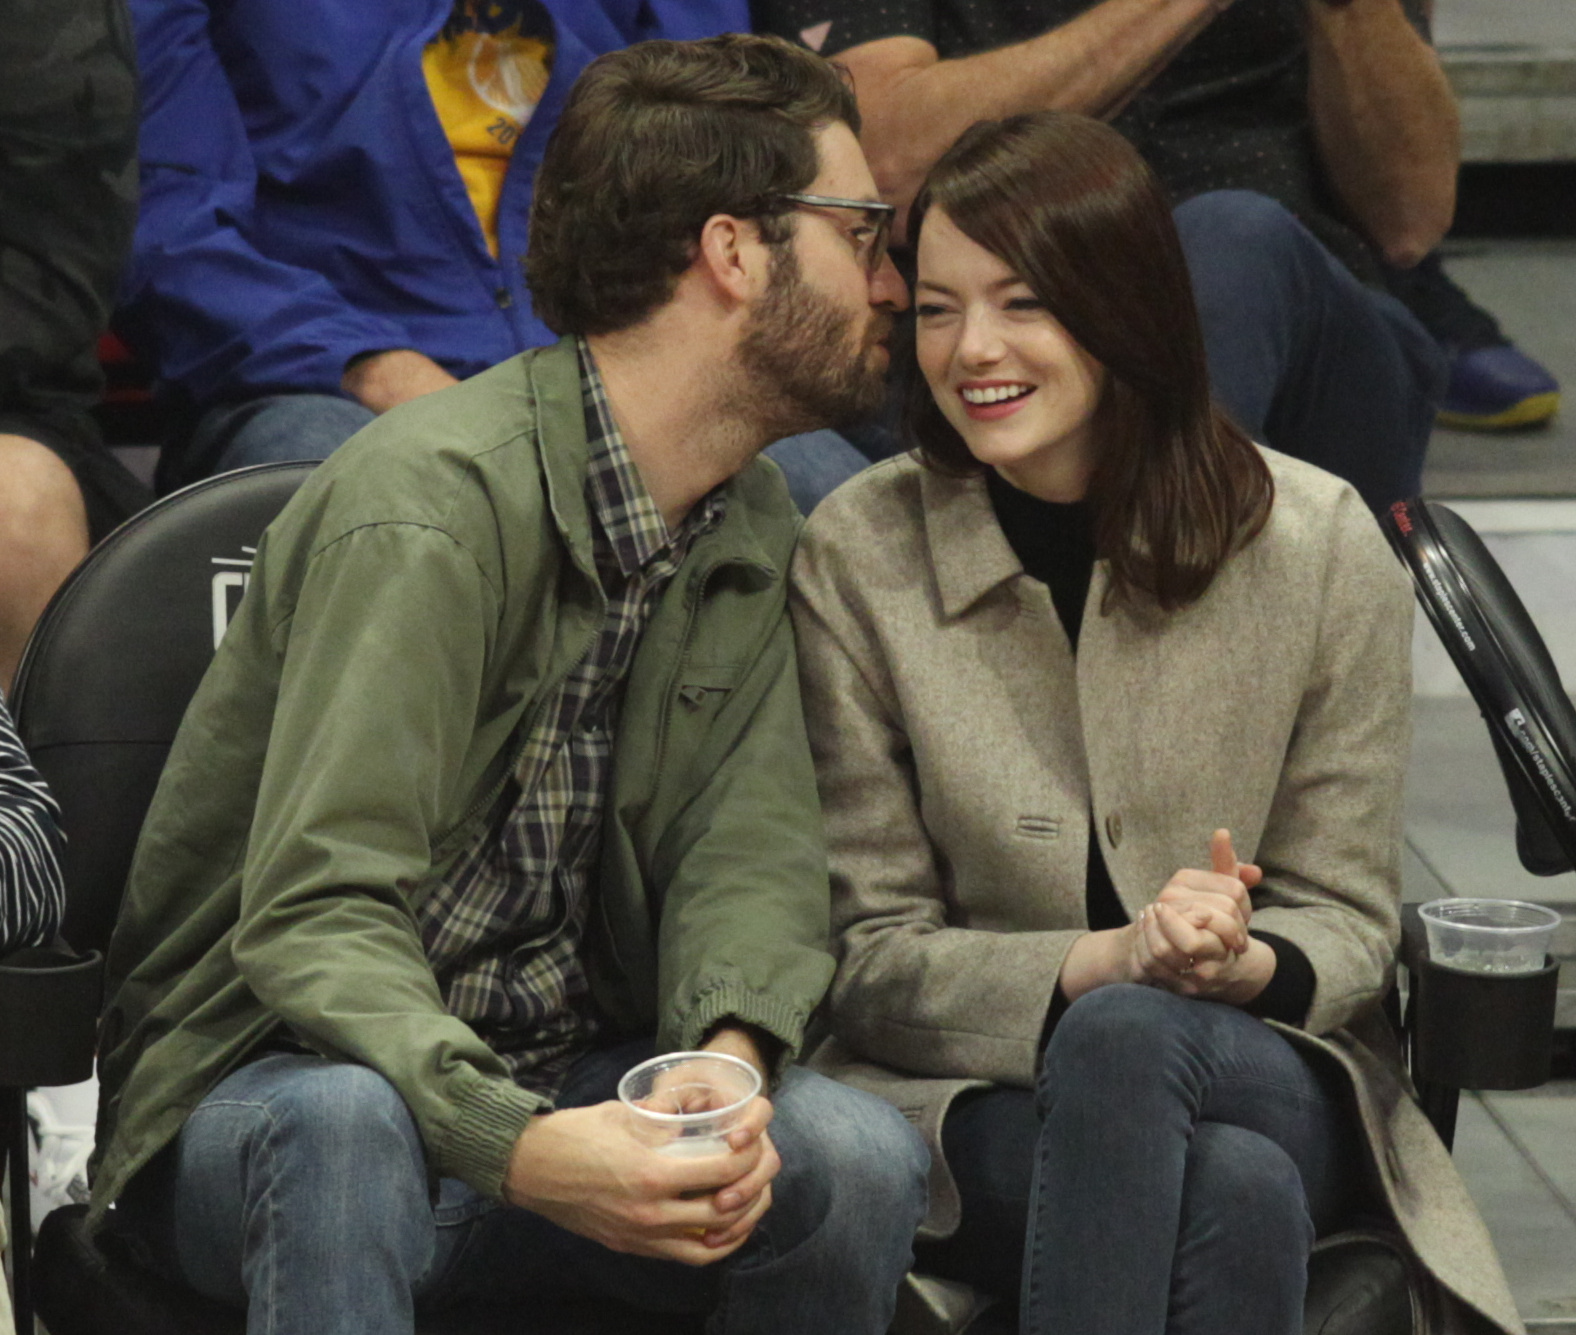 Emma Stone flashes her massive ring and steps out for the first time since  engagement to Dave McCary